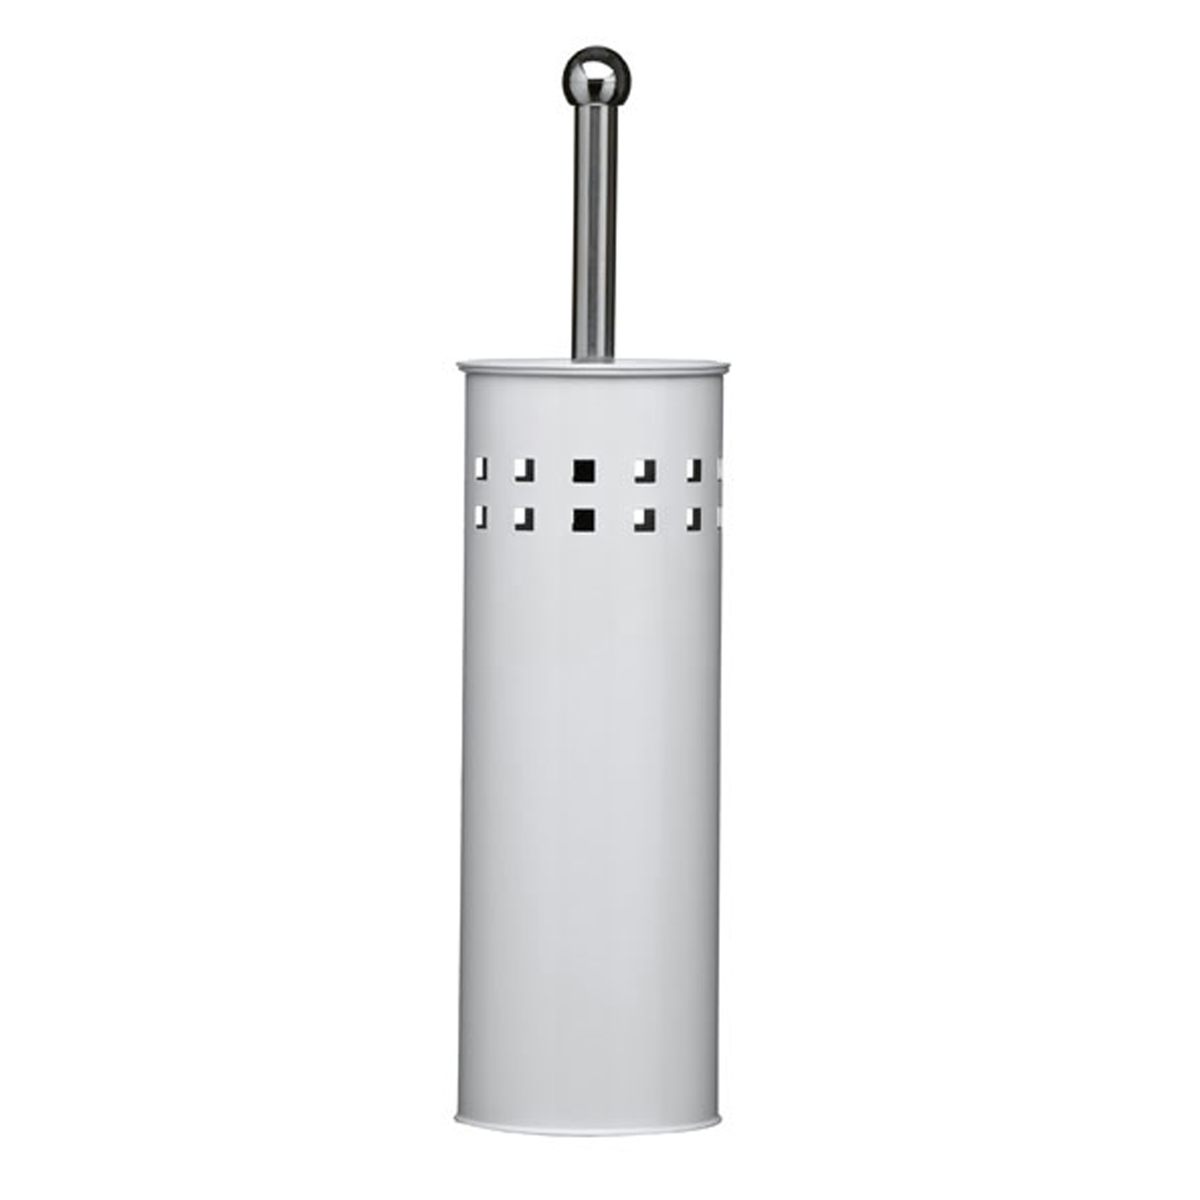 Accents Toilet brush stainless steel white